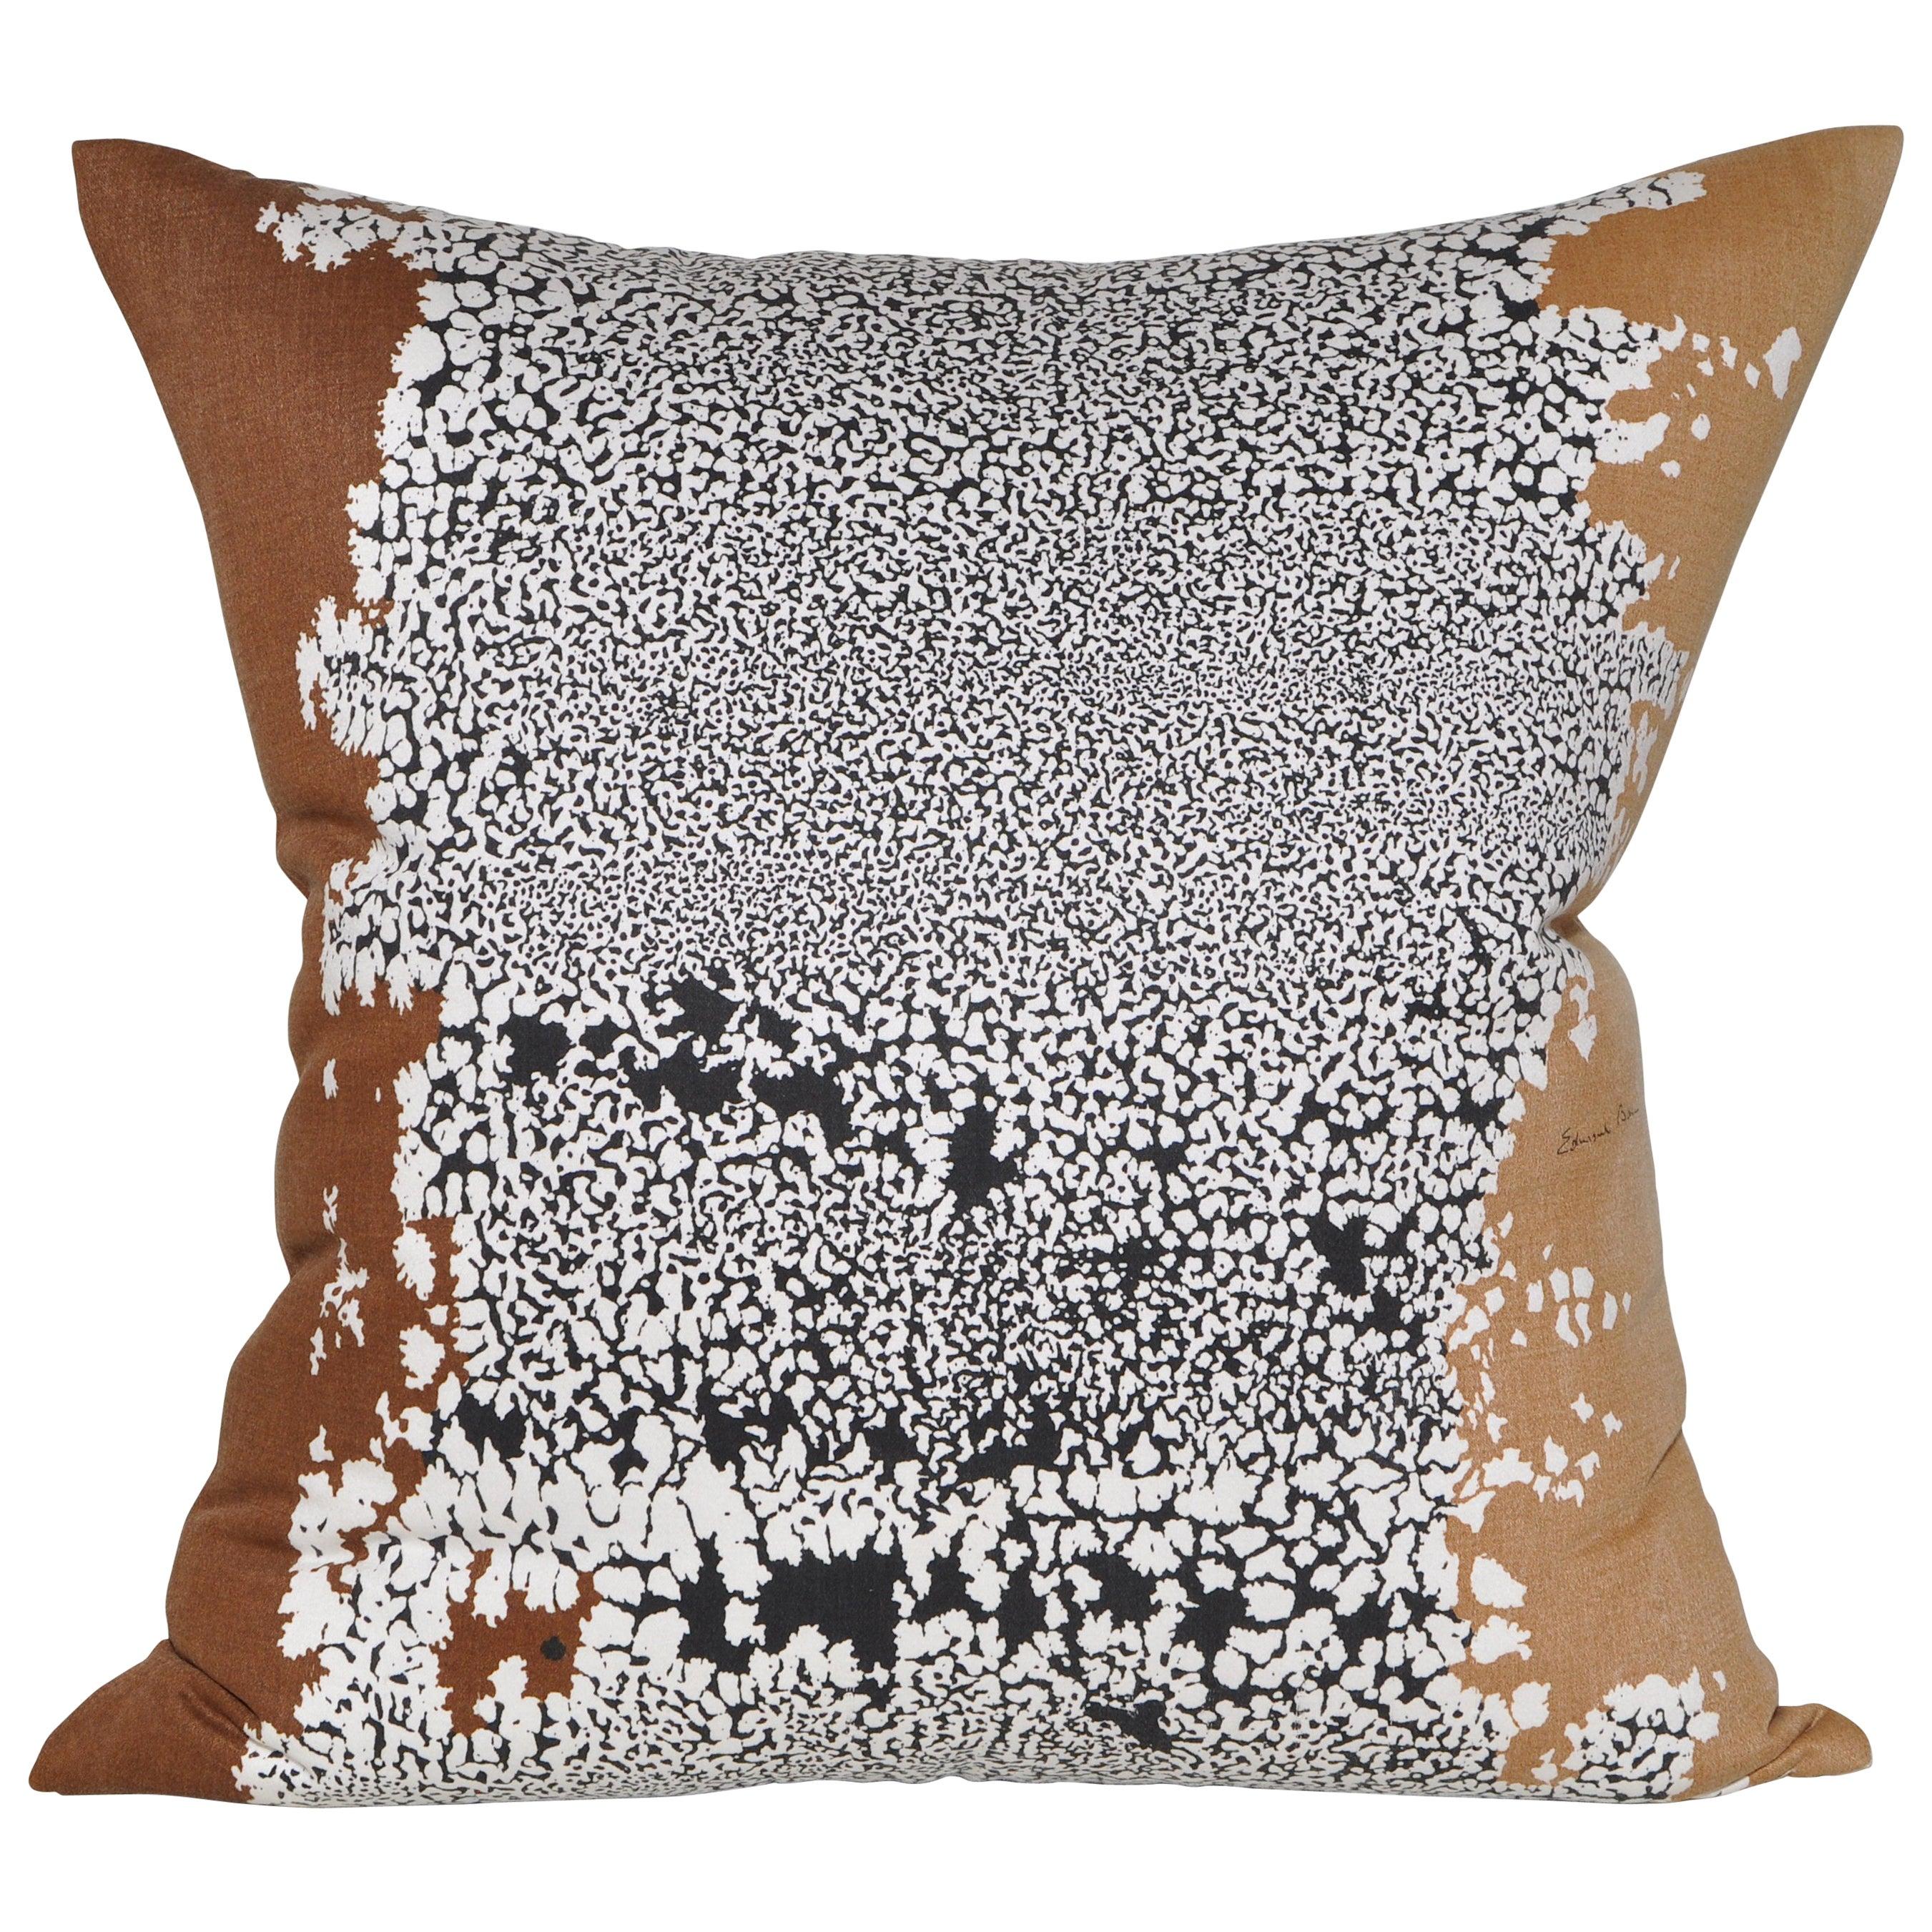 Custom made large pair of luxury pillows (cushions) created from a rare vintage fabric by midcentury artist Edmund Bacci in an attractive abstract pattern, backed in new pure Irish linen, filled with new duck and down feather insert and a concealed